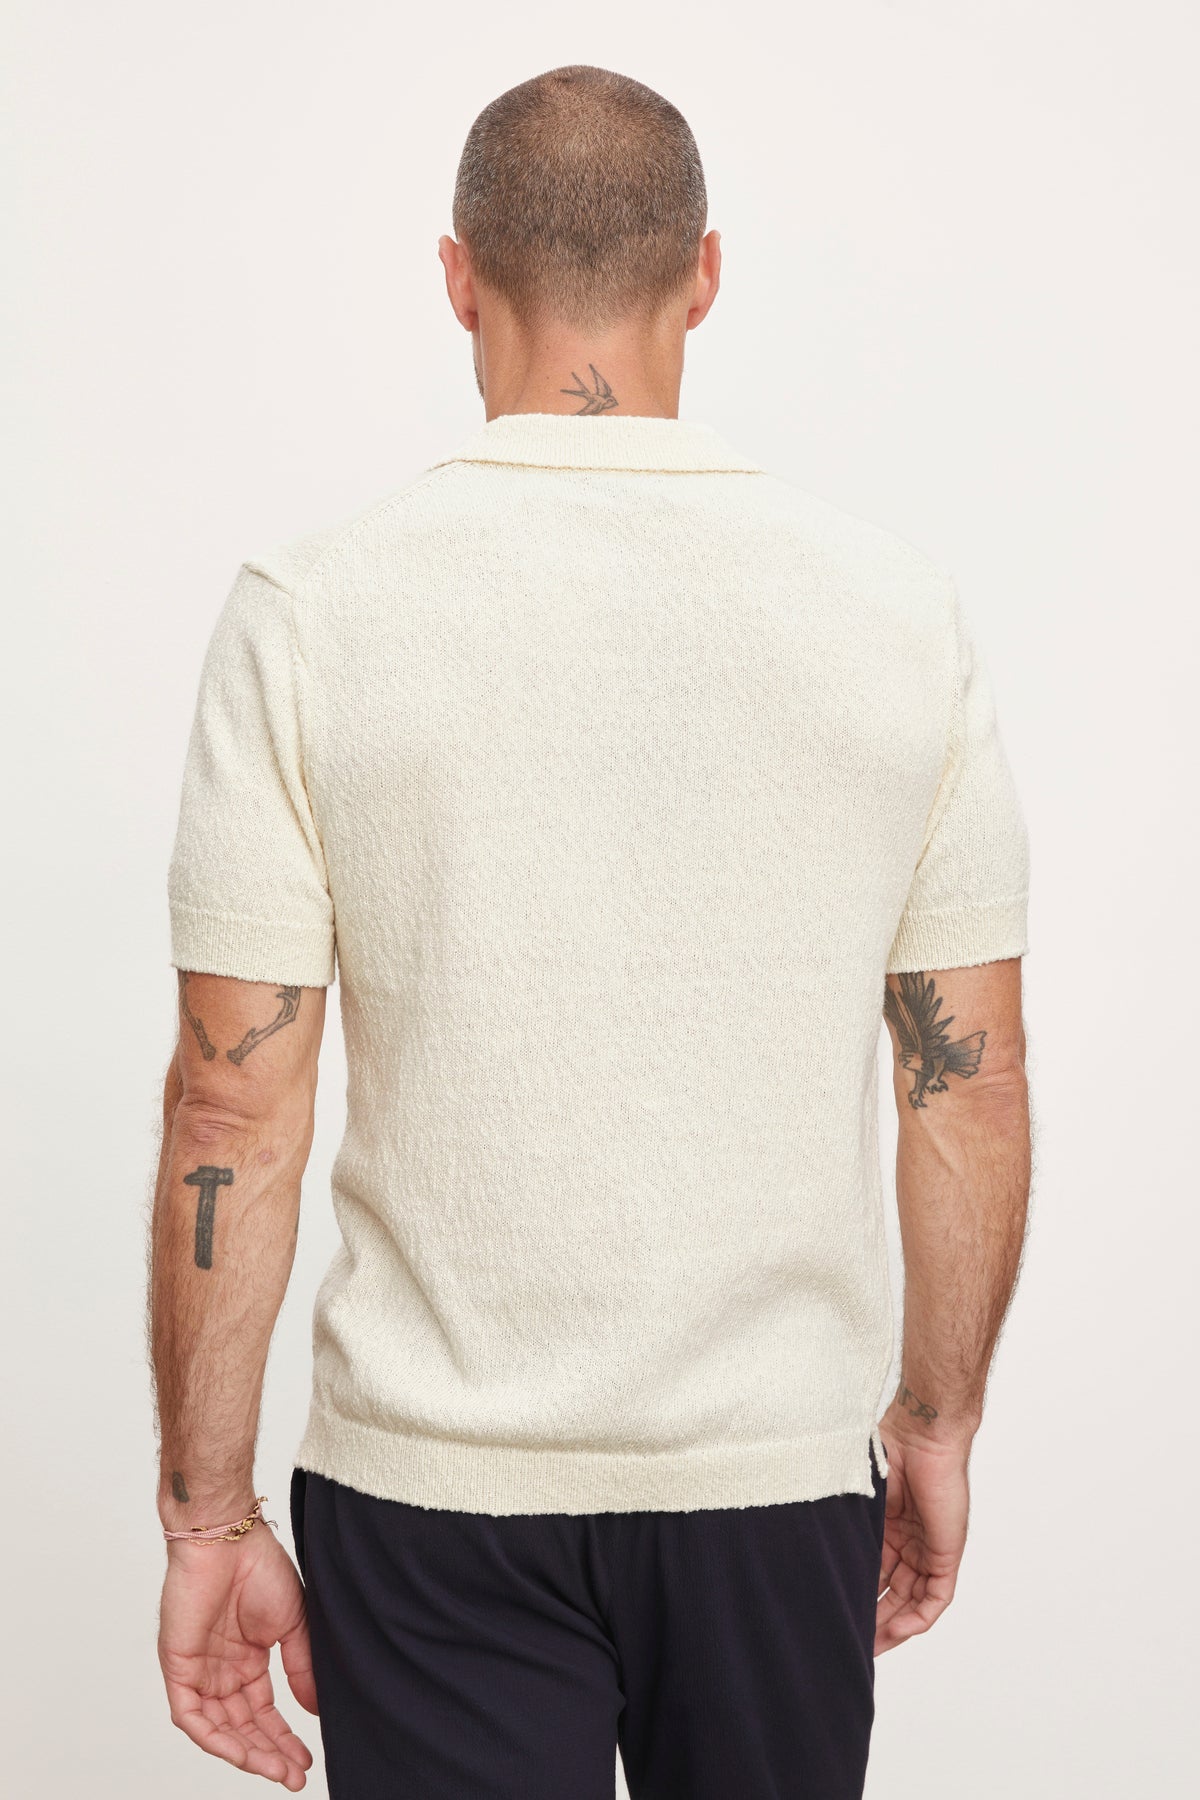 Rear view of a man with tattoos standing, wearing a Velvet by Graham & Spencer TIBERIUS POLO shirt and dark pants.-36753572954305